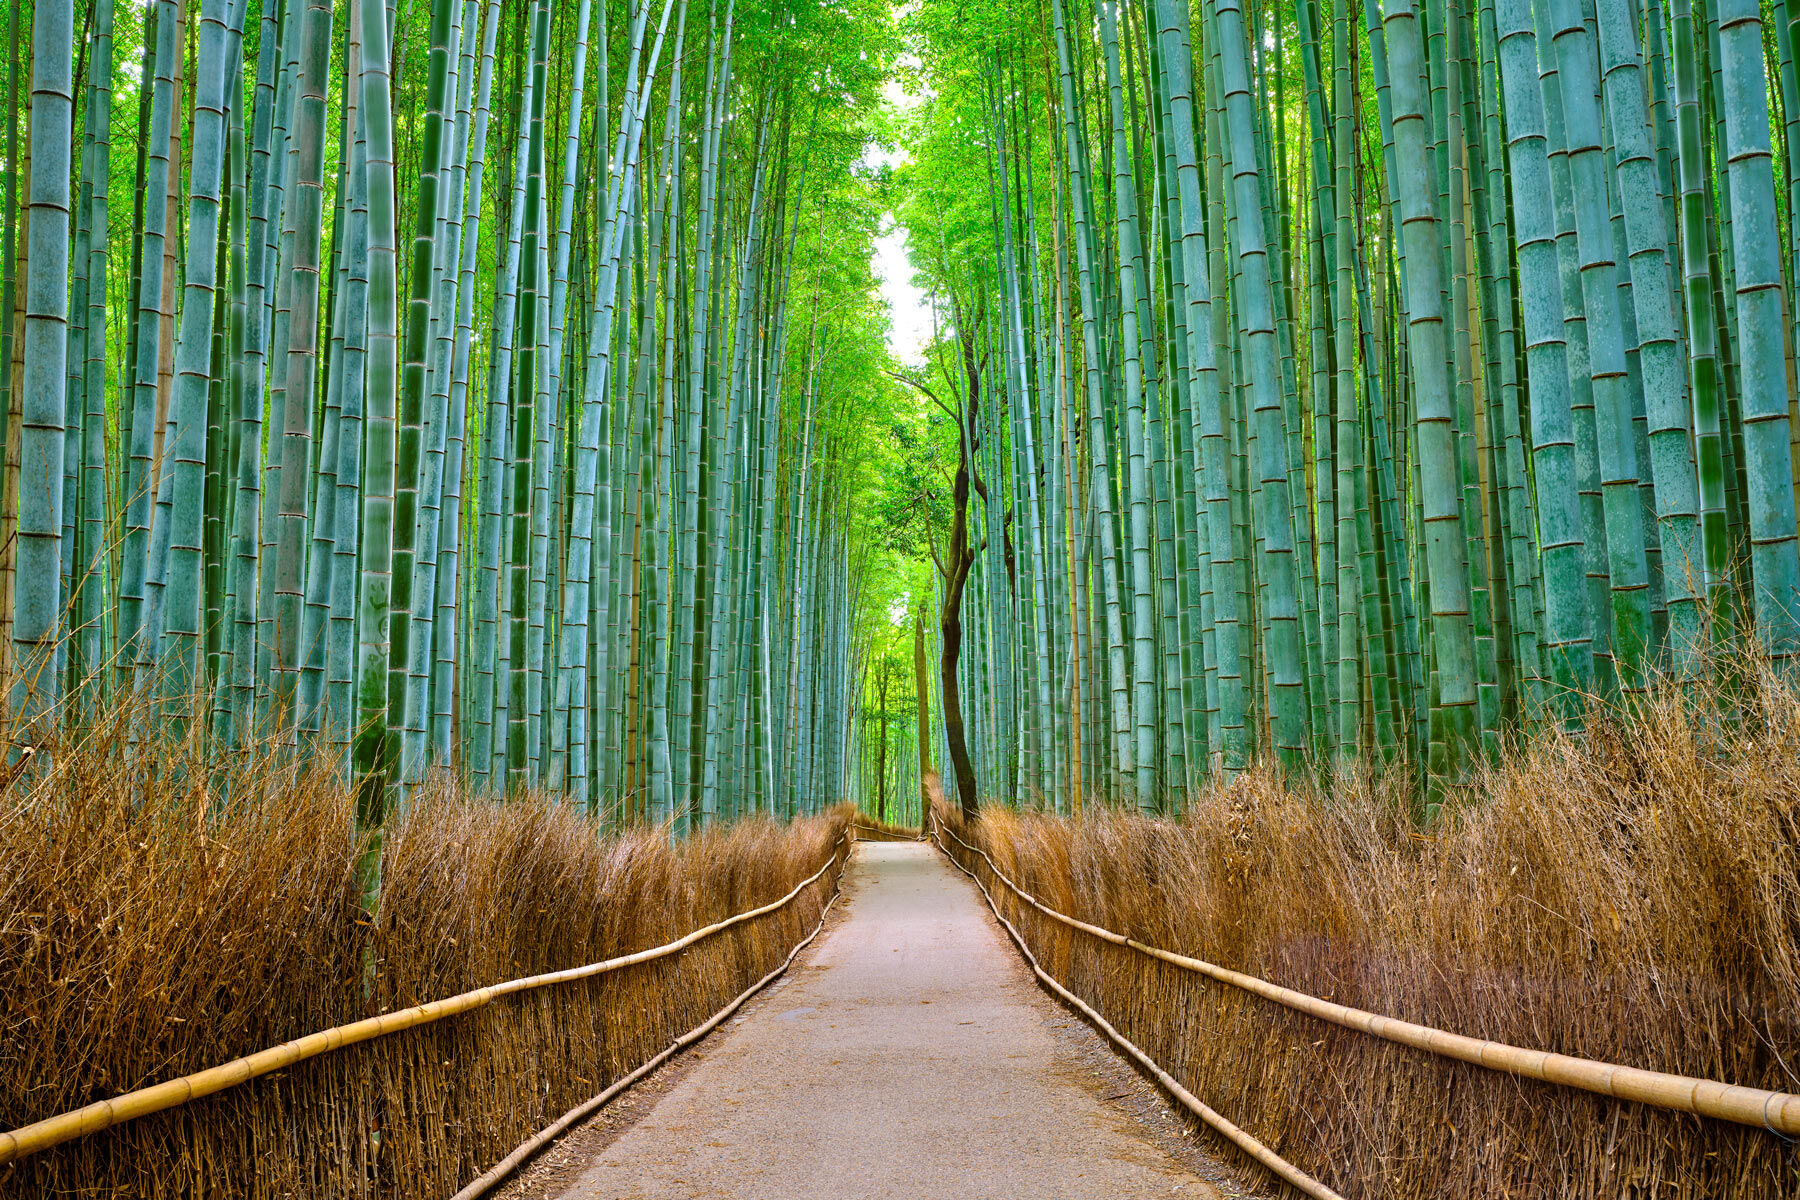 Kyoto Dreams is a fine art photograph from Japan looking down the pathway of the Arashiyama Bamboo forest path in Kyoto, Japan.